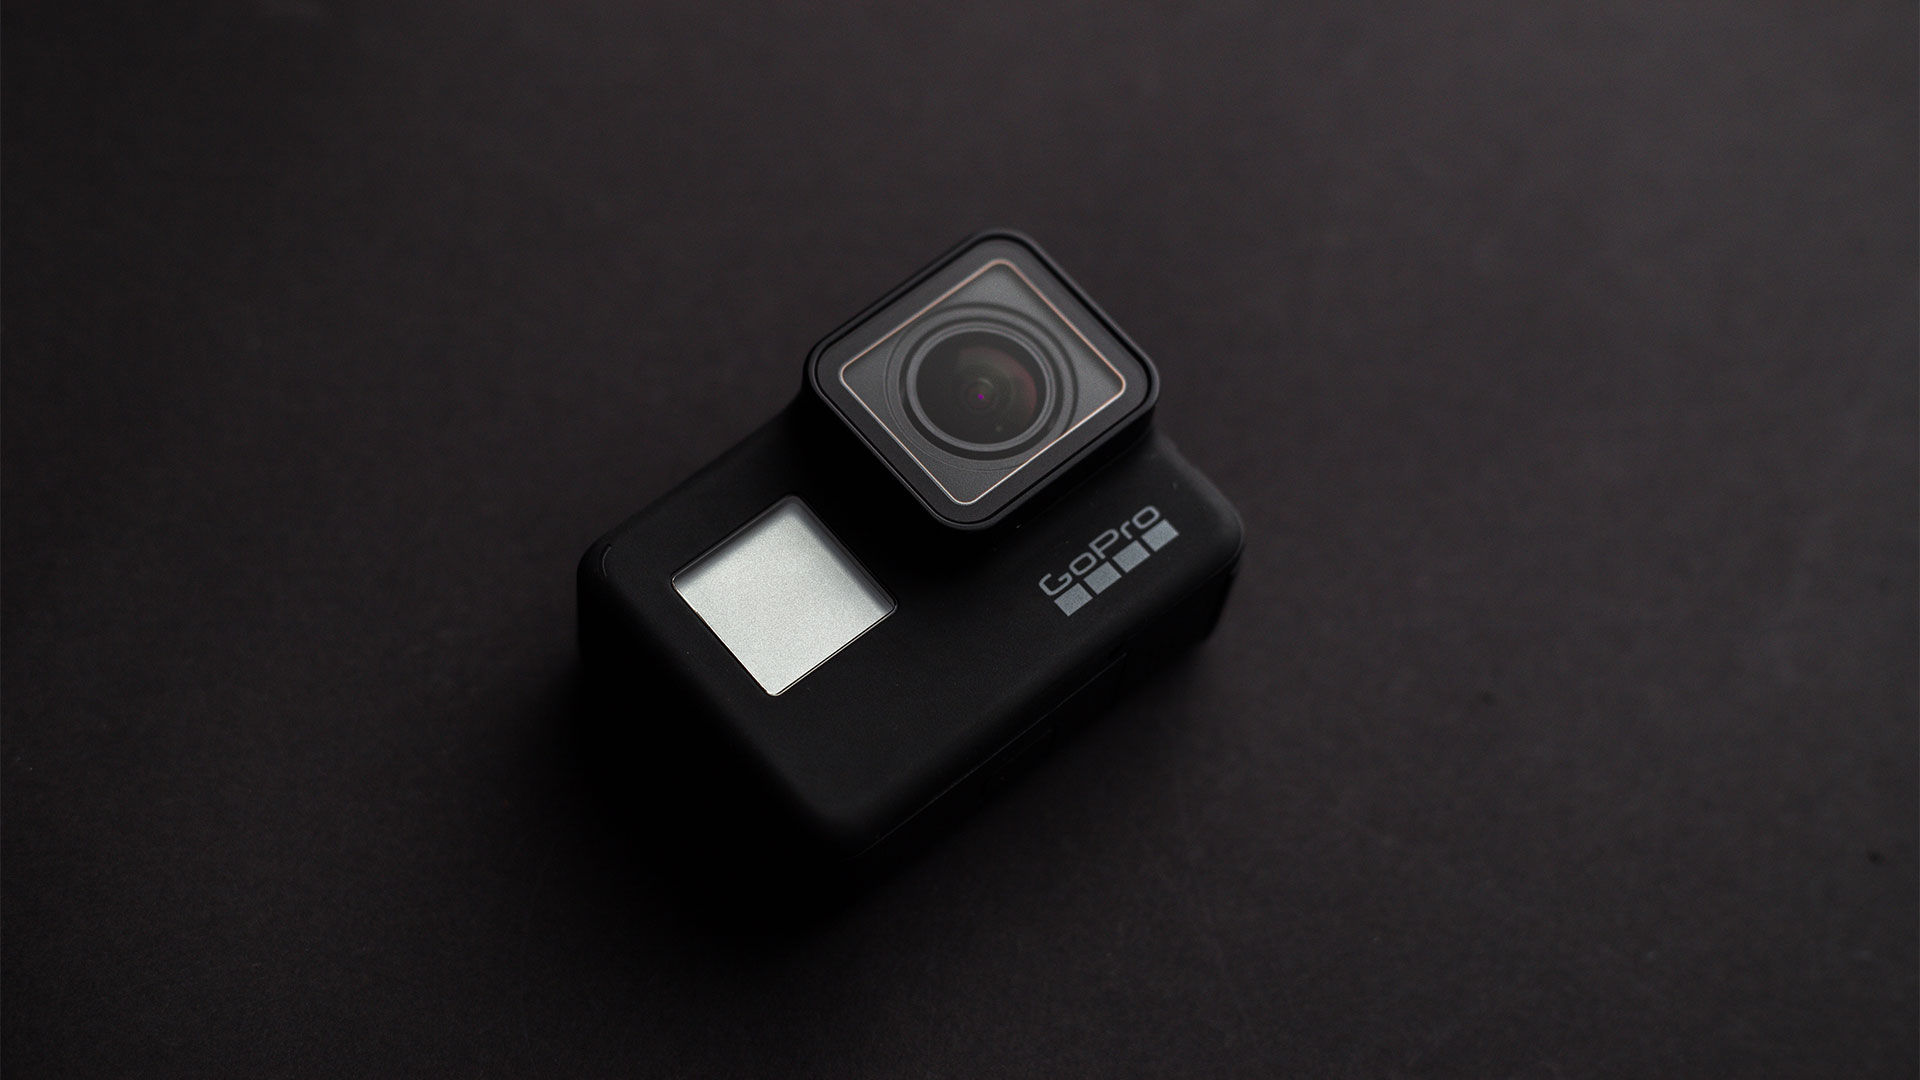 What Is the Newest GoPro